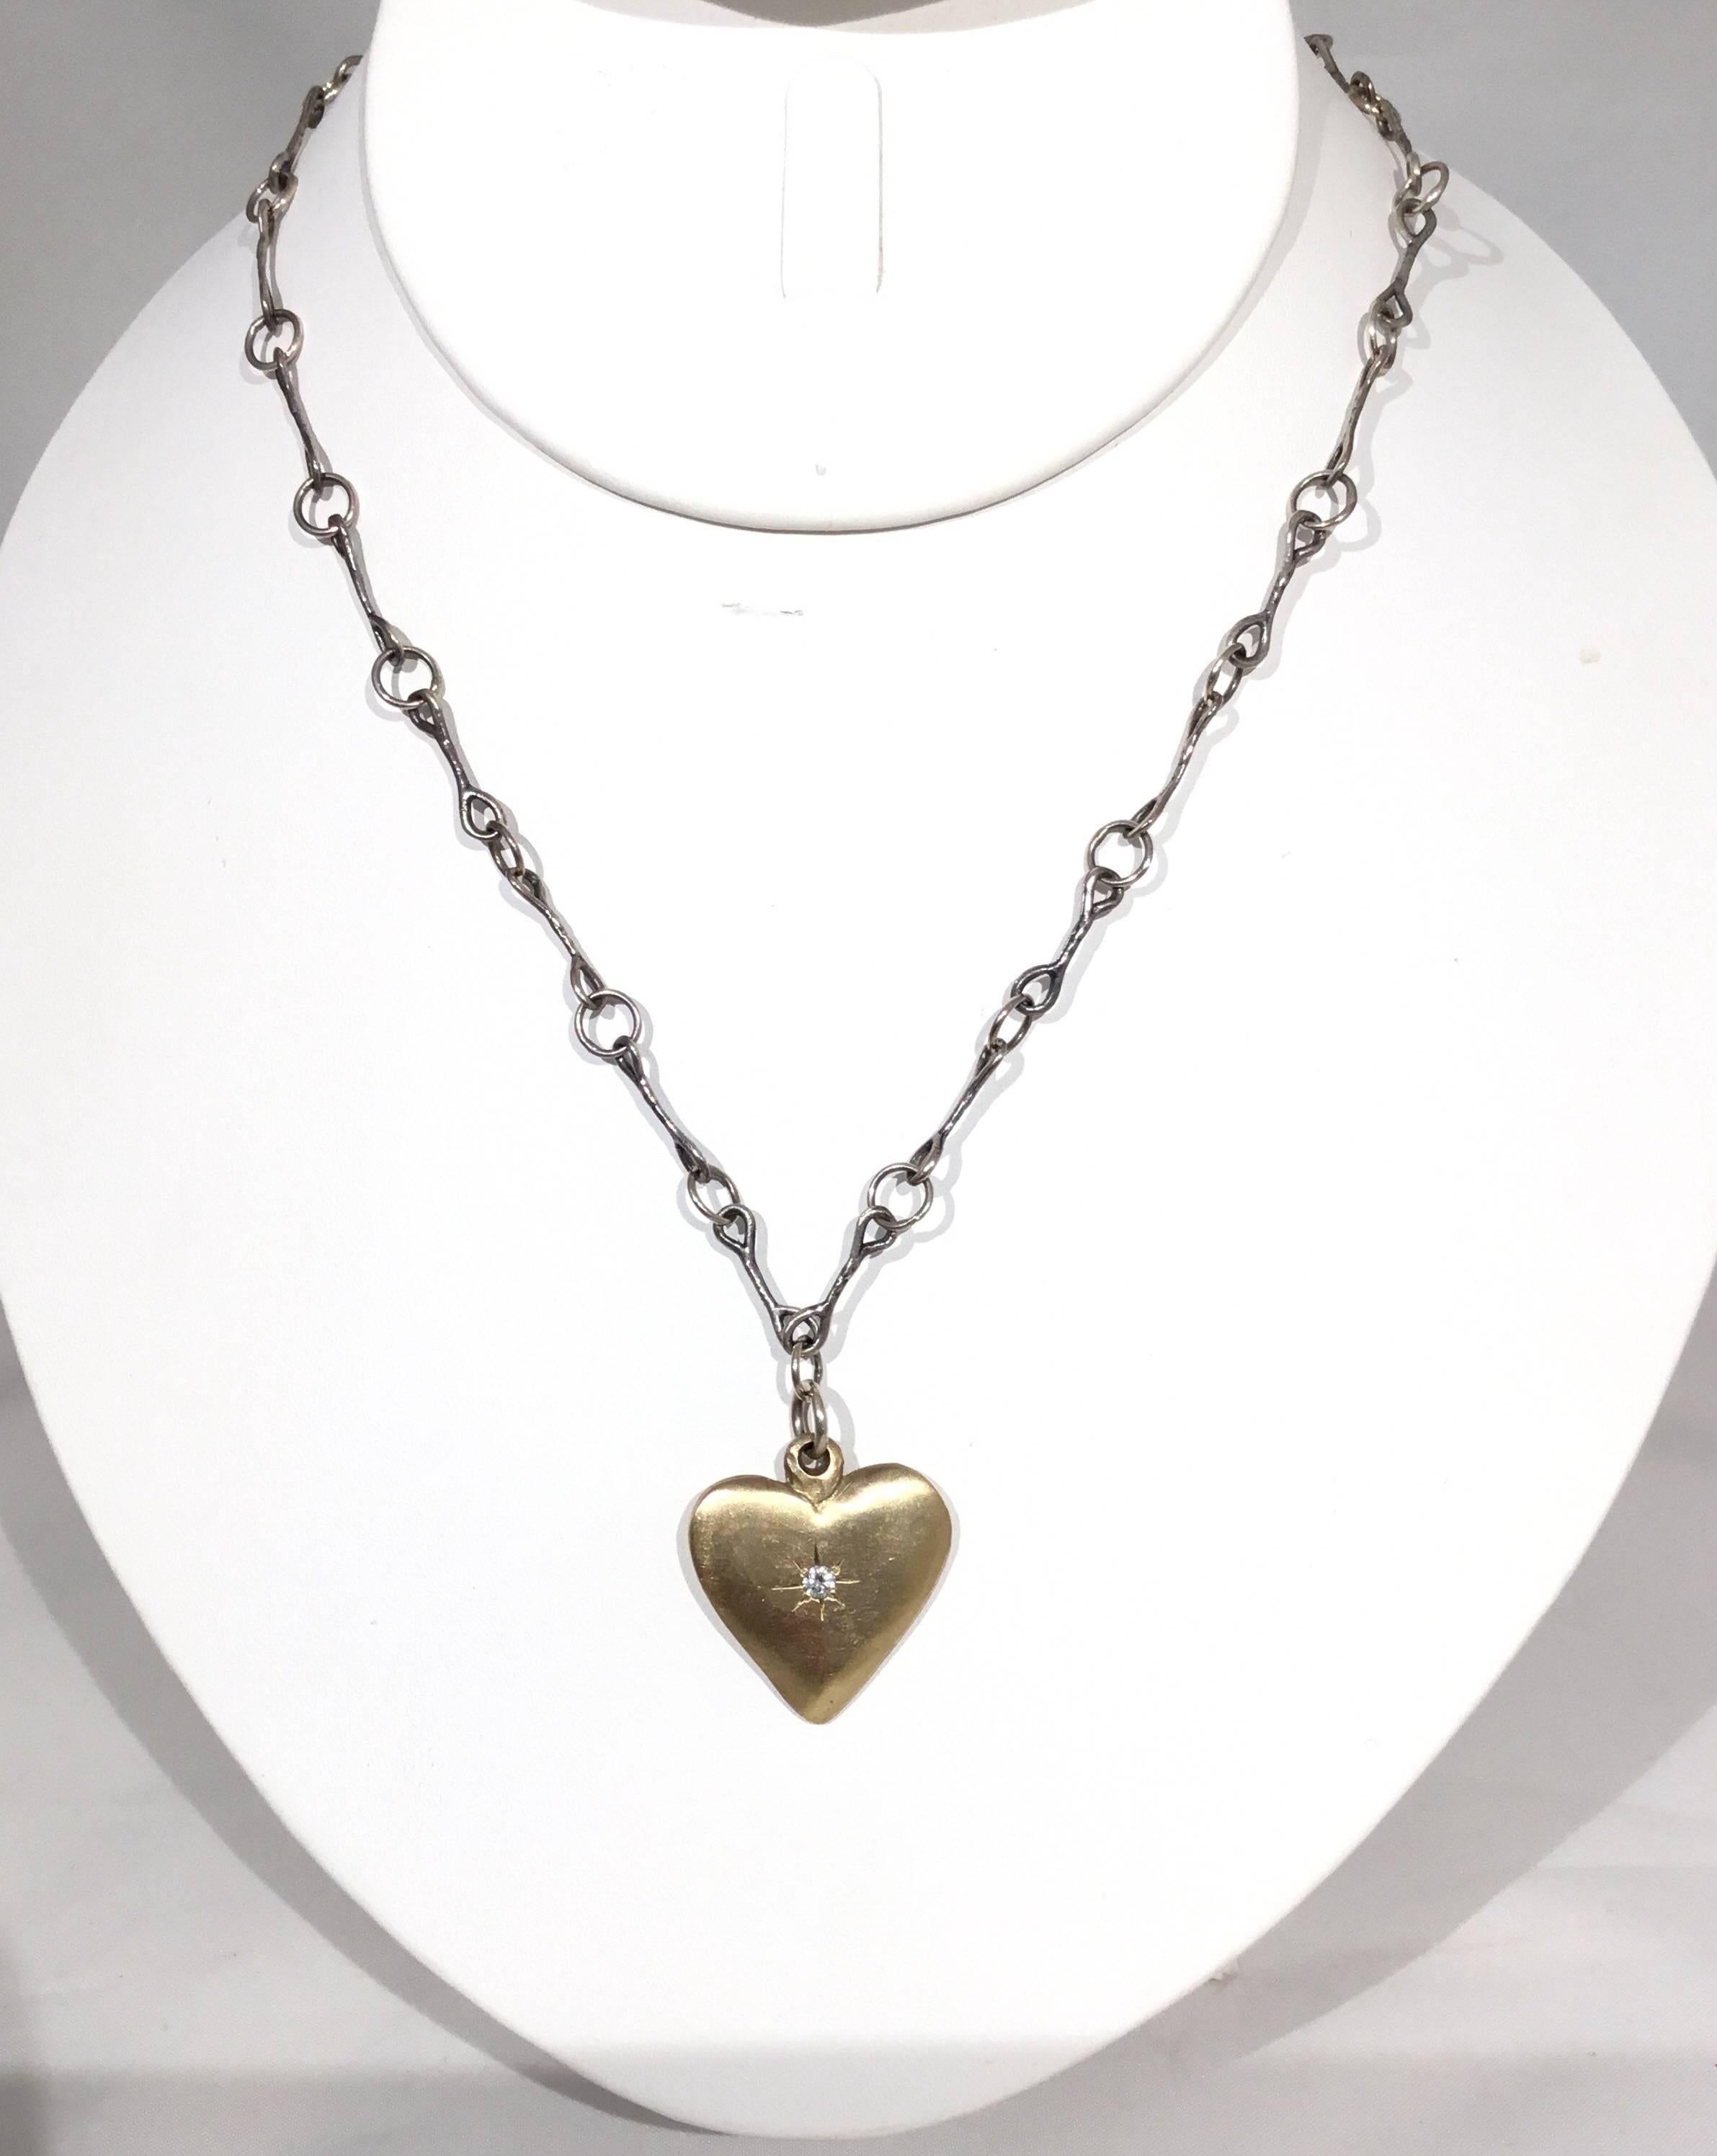 Jes Maharry sterling silver chain necklace features a gold heart shaped pendant with a diamond at the center and an engraved quote at the back that reads 